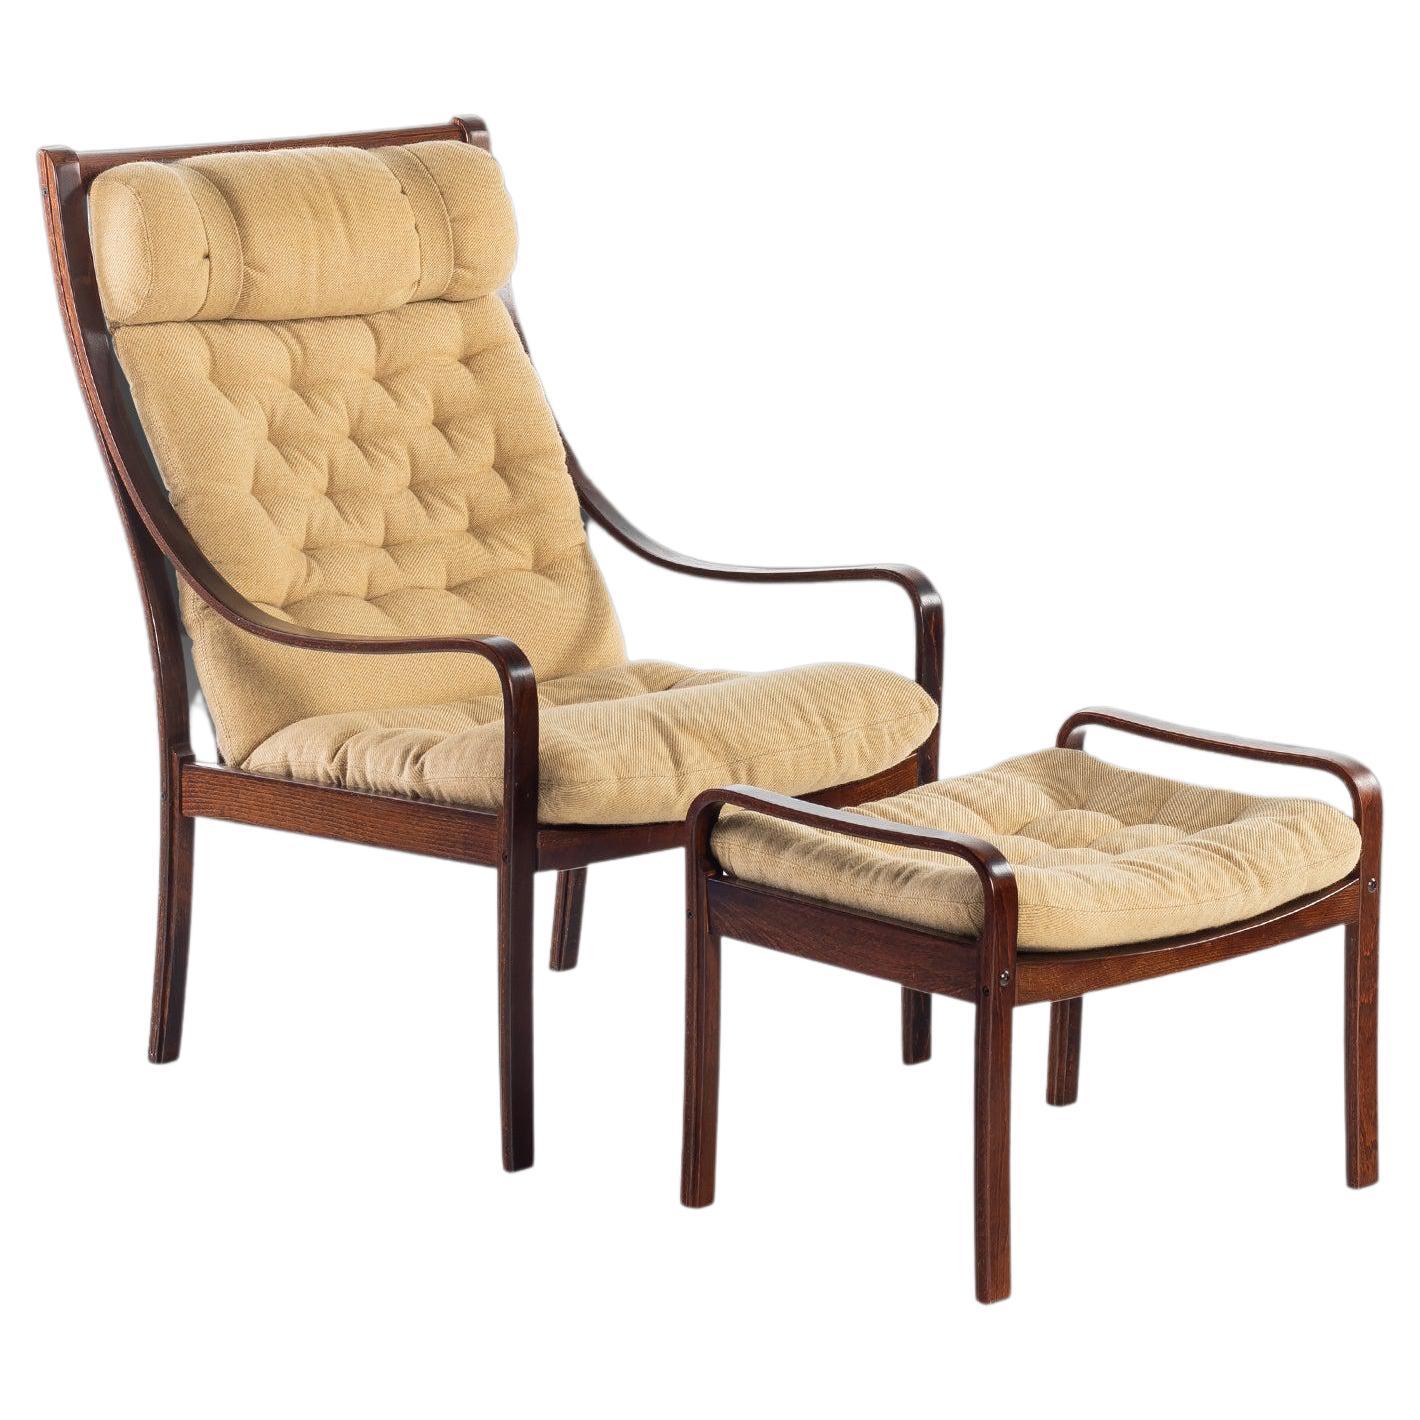 Bentwood Lounge Chair w/ Ottoman by Fredrik A. Kayser for Vatne, Denmark, 1960s For Sale